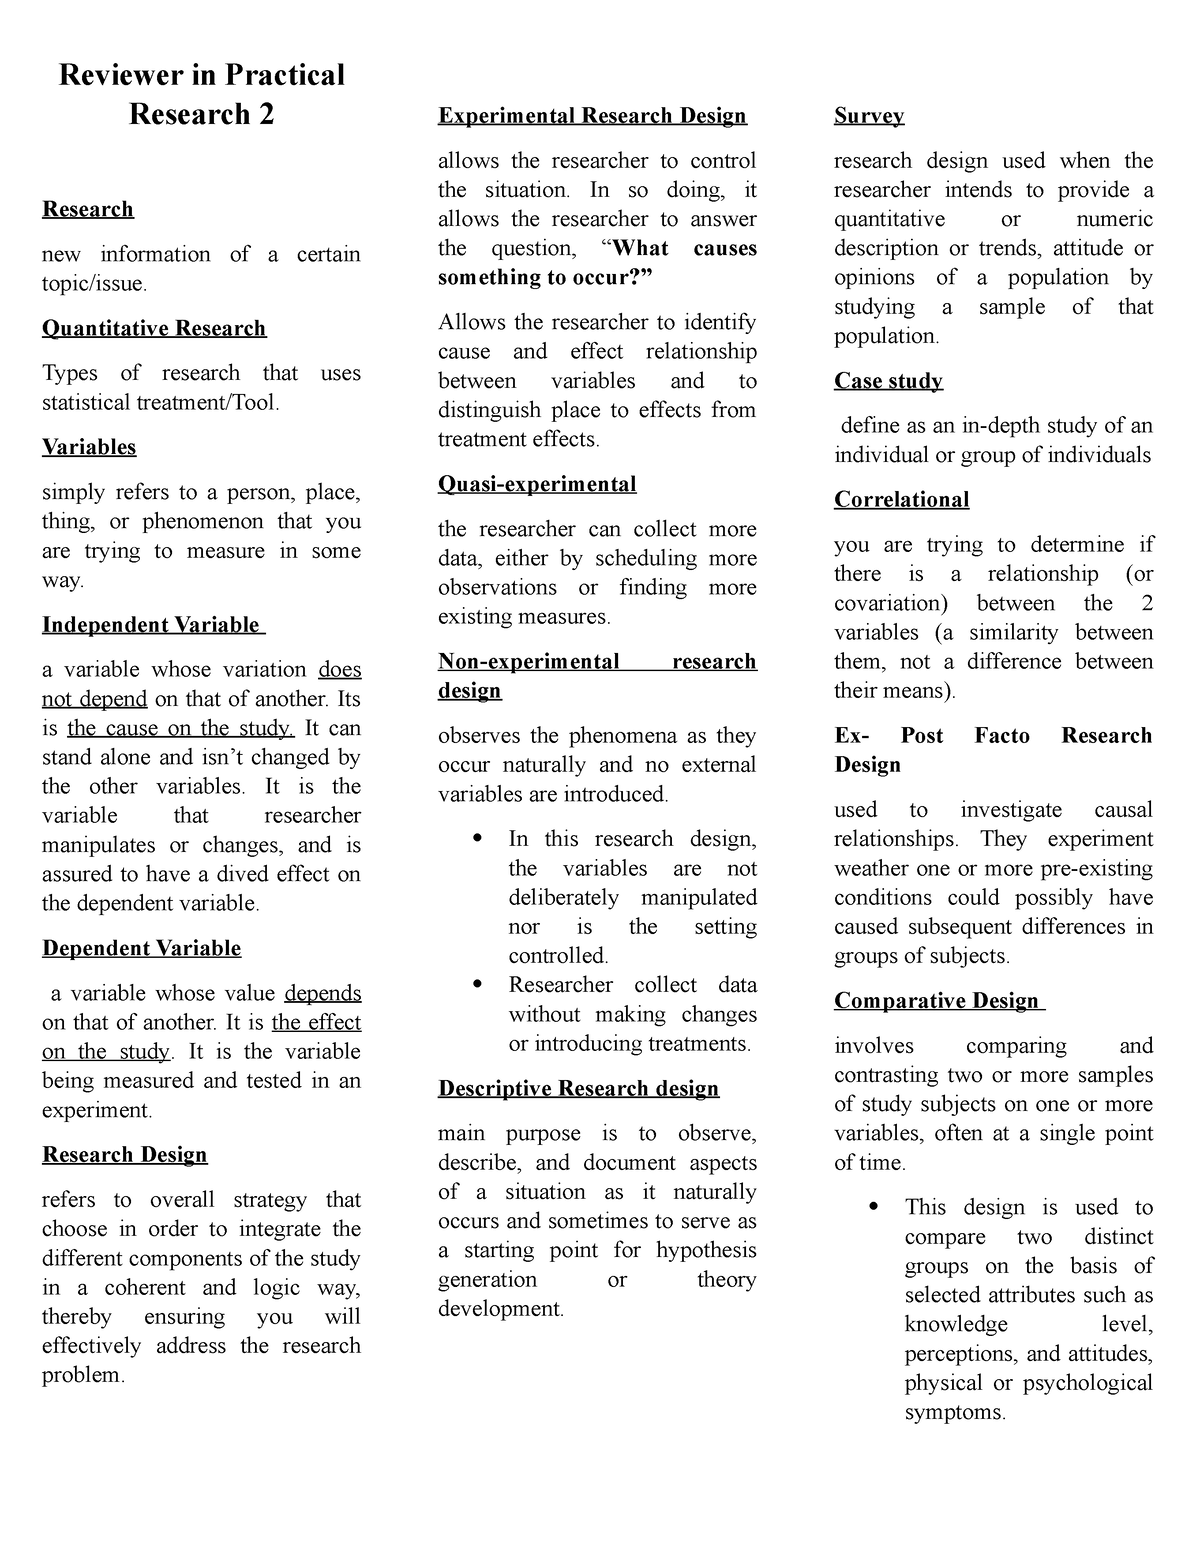 practical research 2 conceptual framework and review of related literature answer key